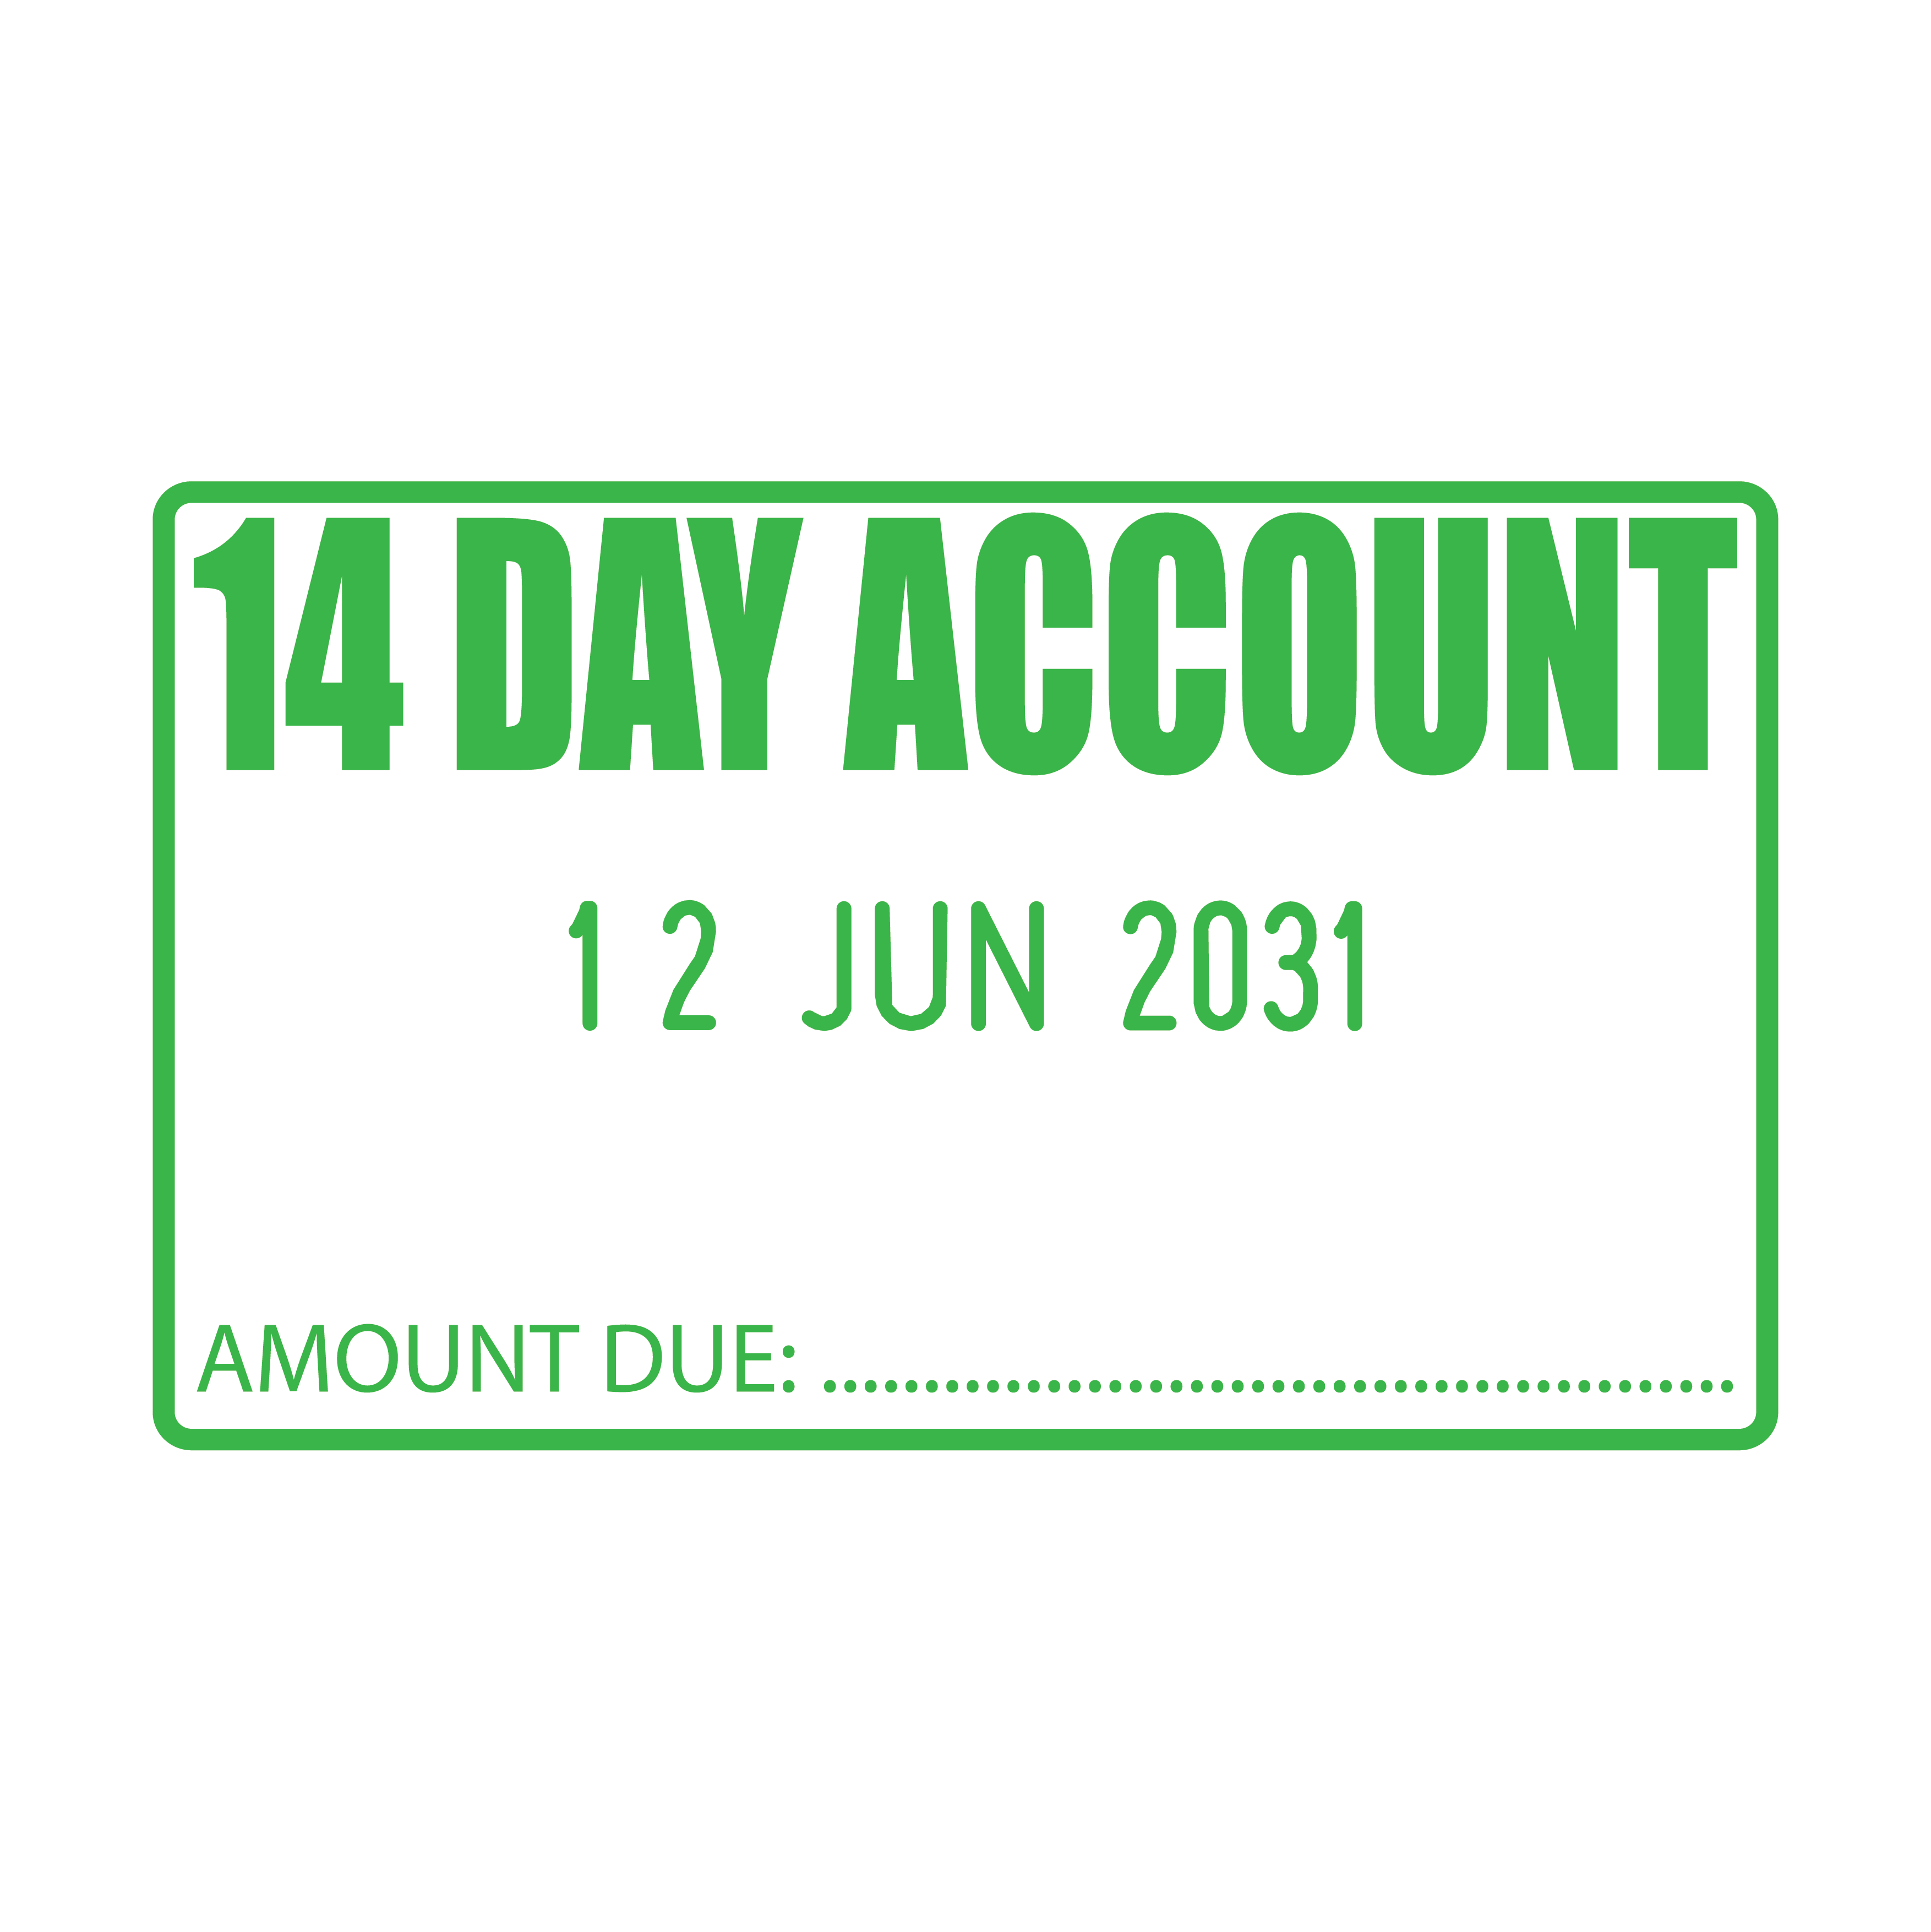 14 Day account date stamp design in Apple-Green